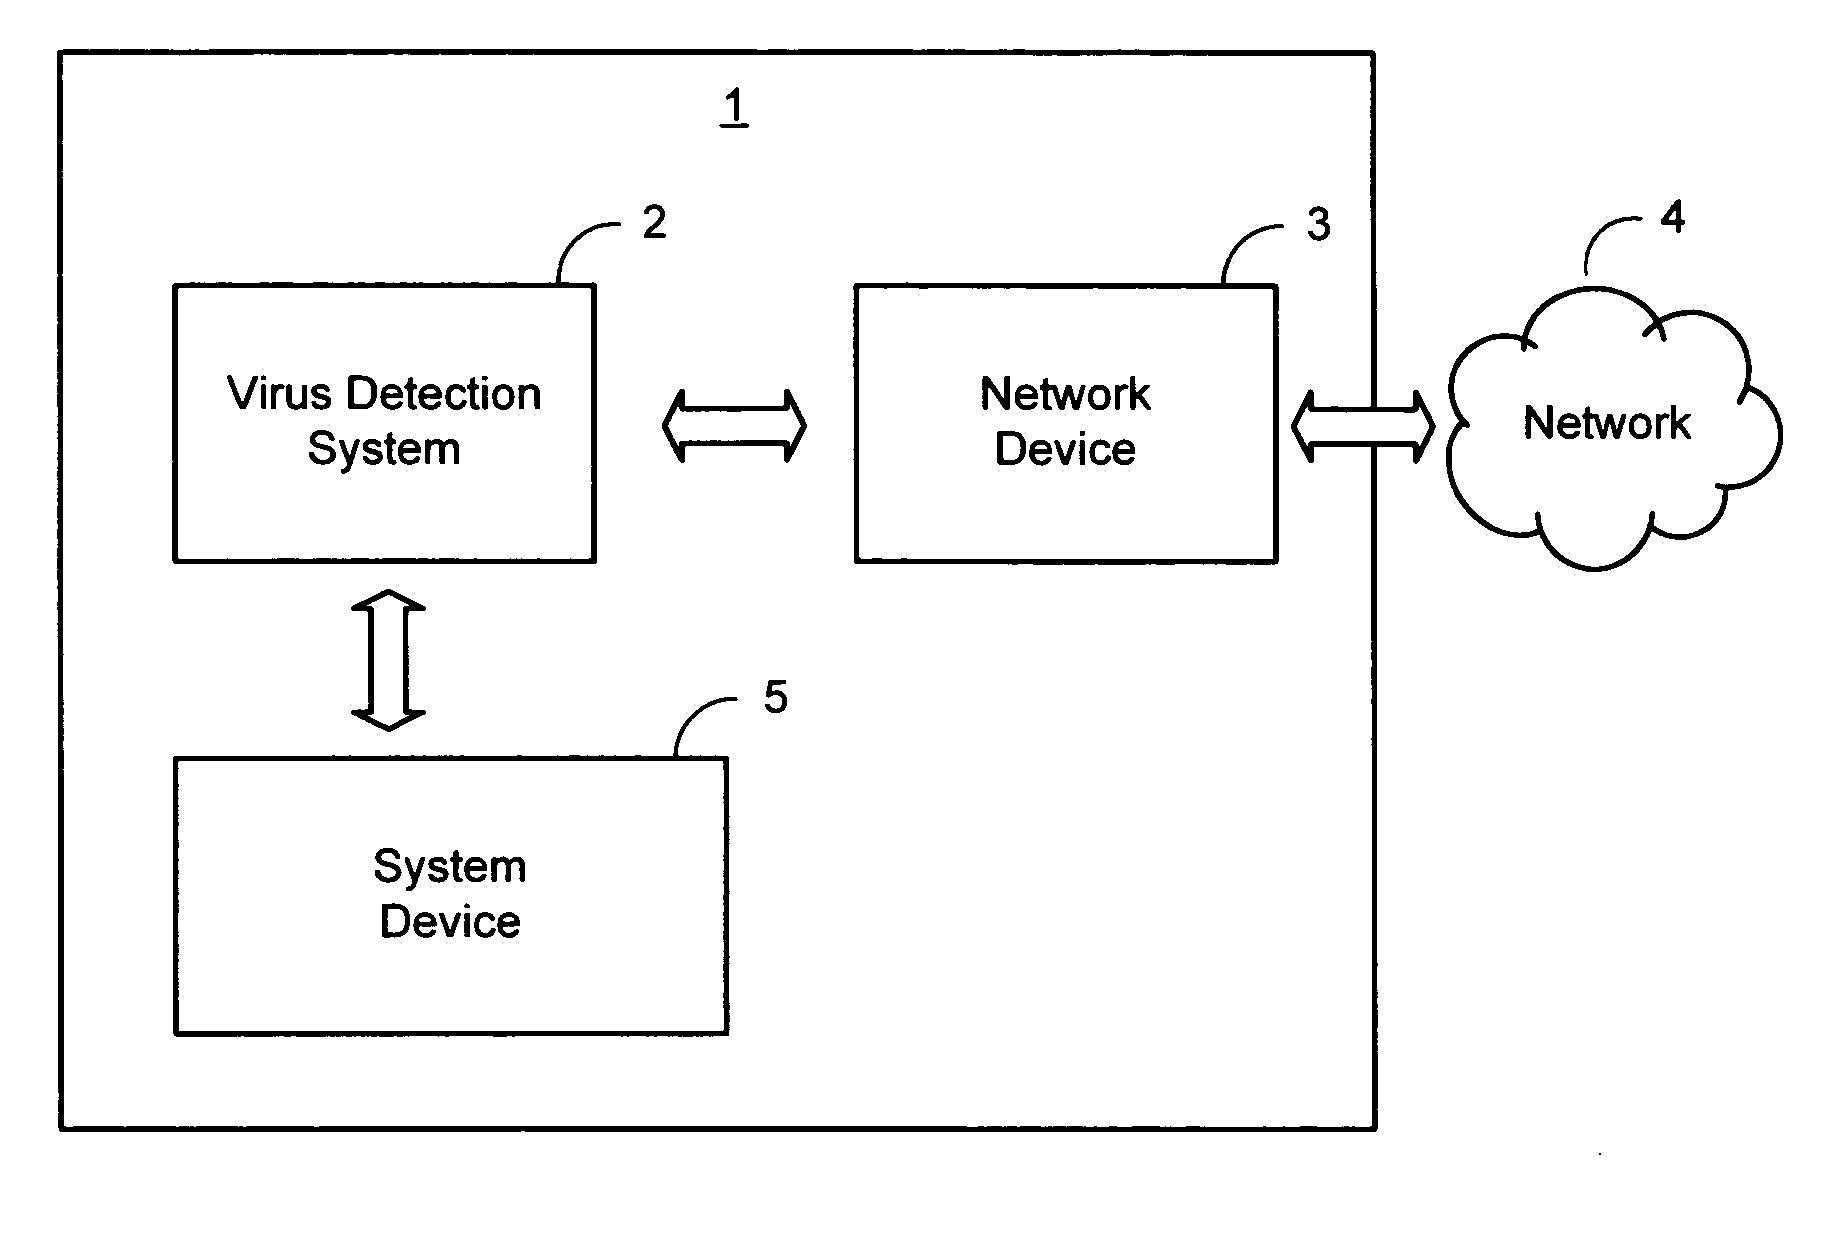 Method and system for virus detection using pattern matching techniques